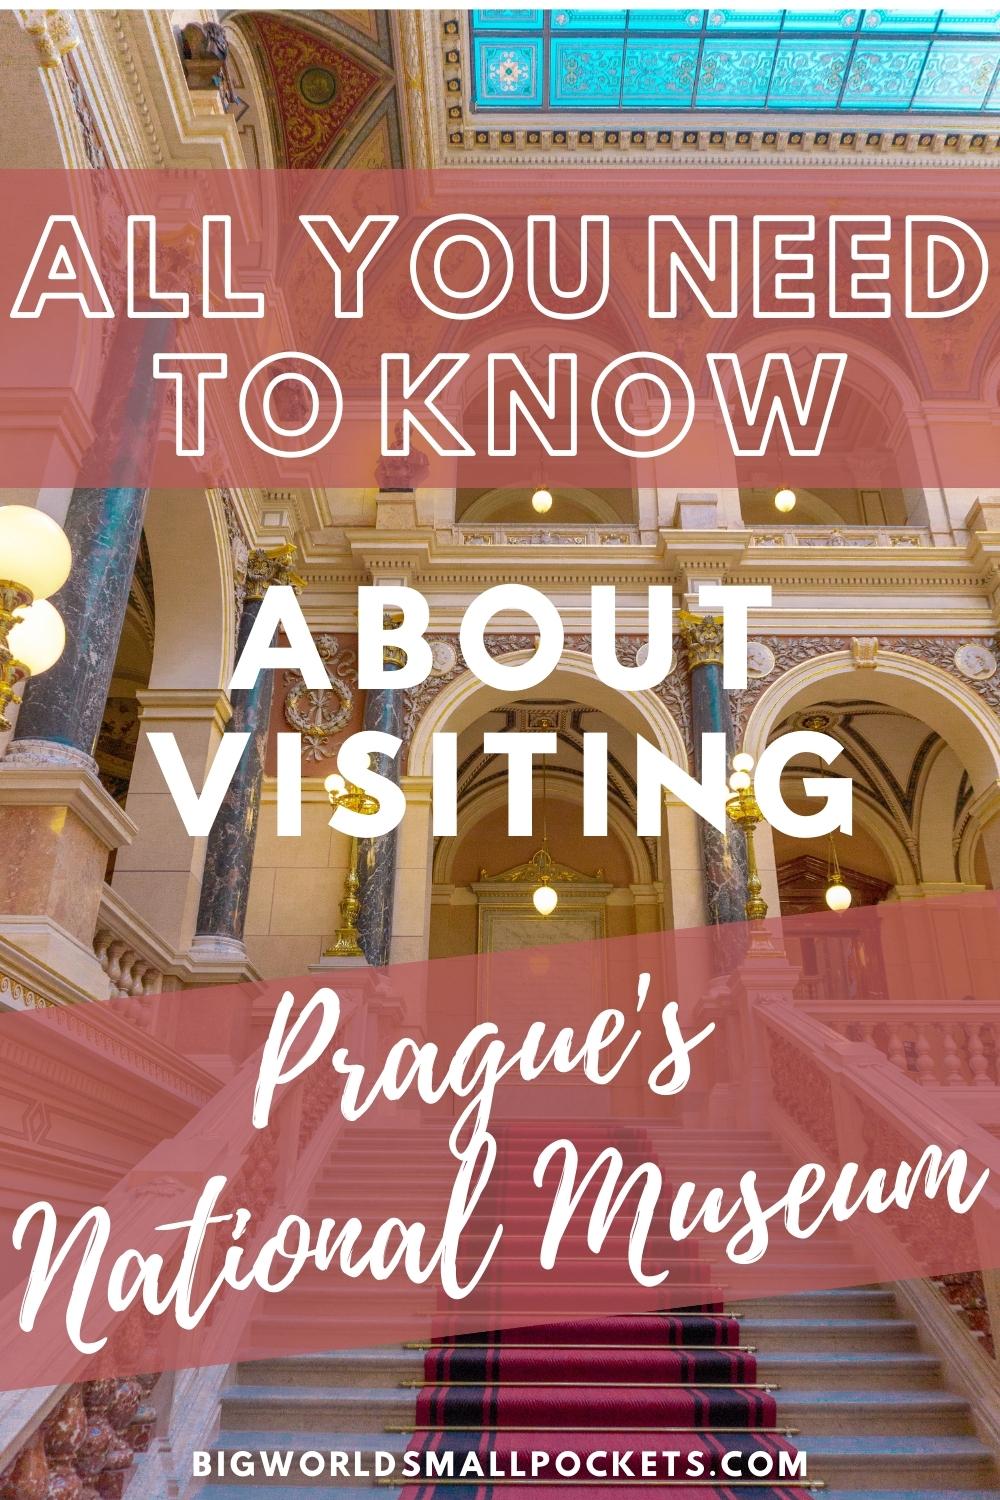 All You Need to Know about Visiting Prague's National Museum